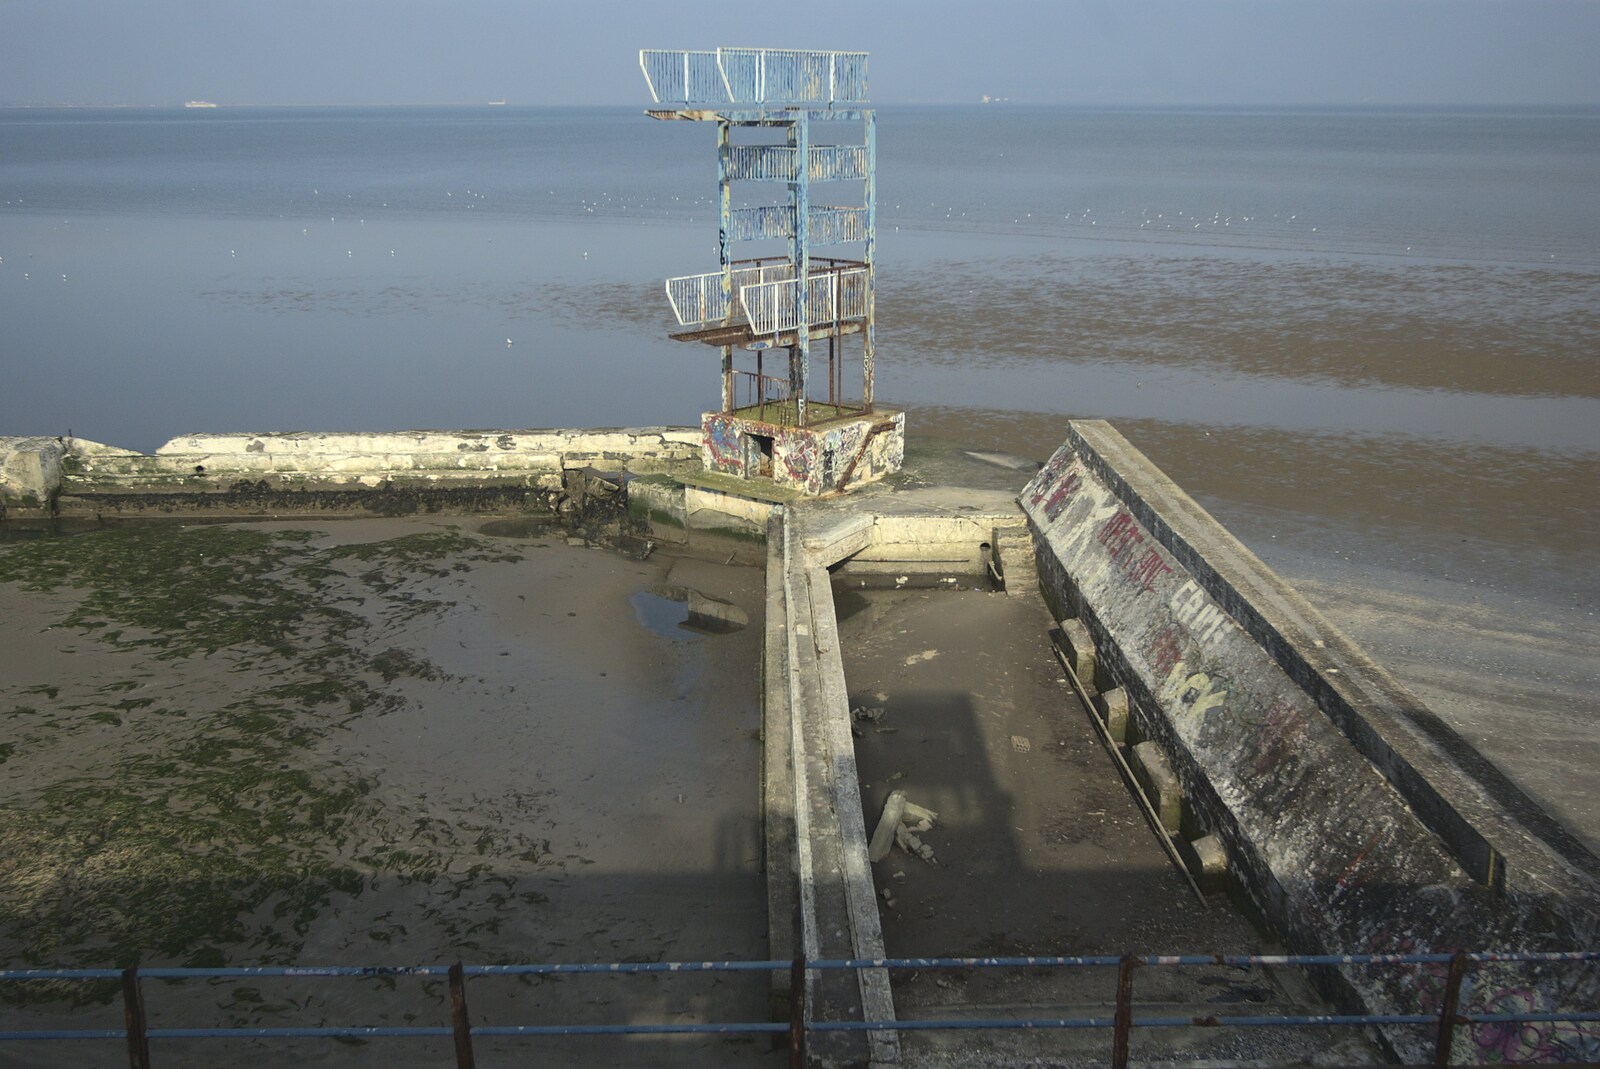 The derelict Blackrock Baths, behind the station from A Week in Monkstown, County Dublin, Ireland - 1st March 2011